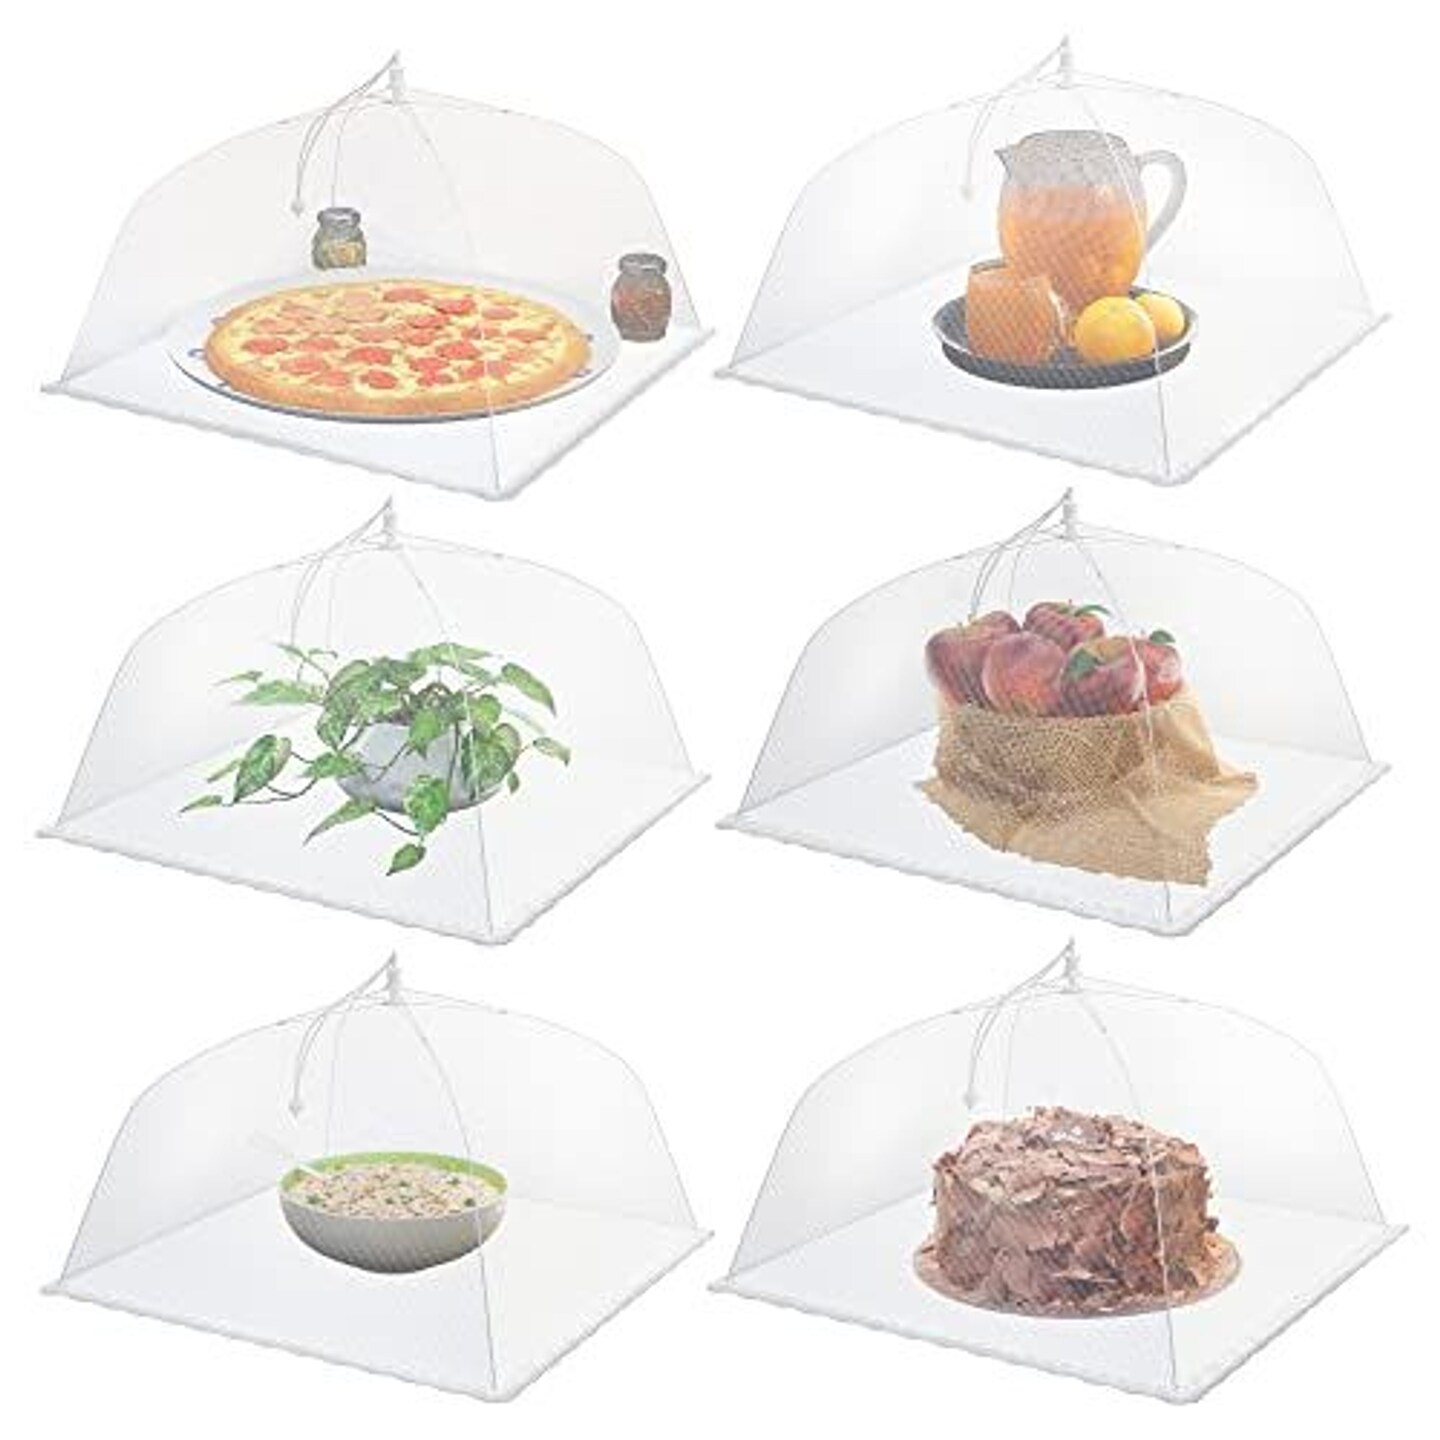 Simply Genius (6 pack) Large and Tall 17x17 Pop-Up Mesh Food Covers Tent Umbrella for Outdoors, Screen Tents, Parties Picnics, BBQs, Reusable and Collapsible Food Tents